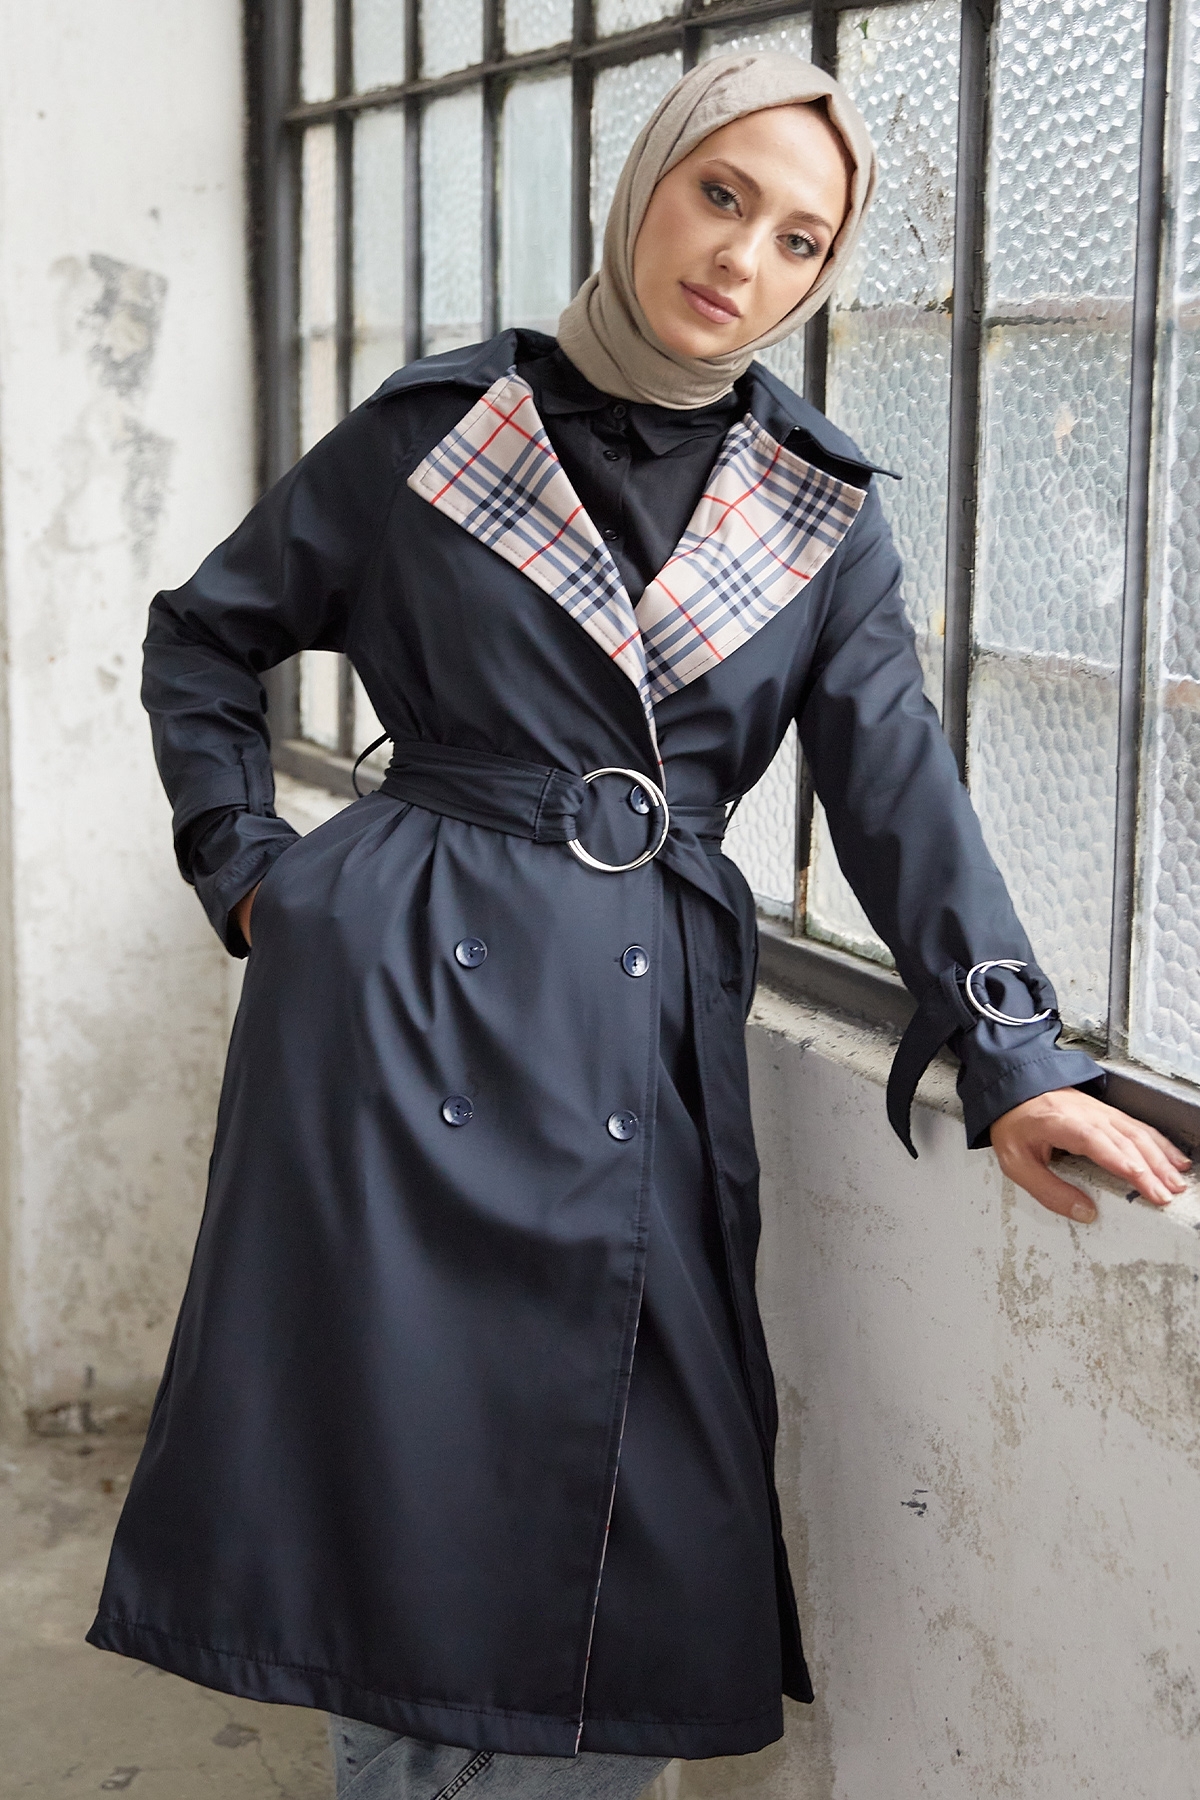 InStyle Eleta Double Breasted Collar Plaid Trench Coat - Navy Blue